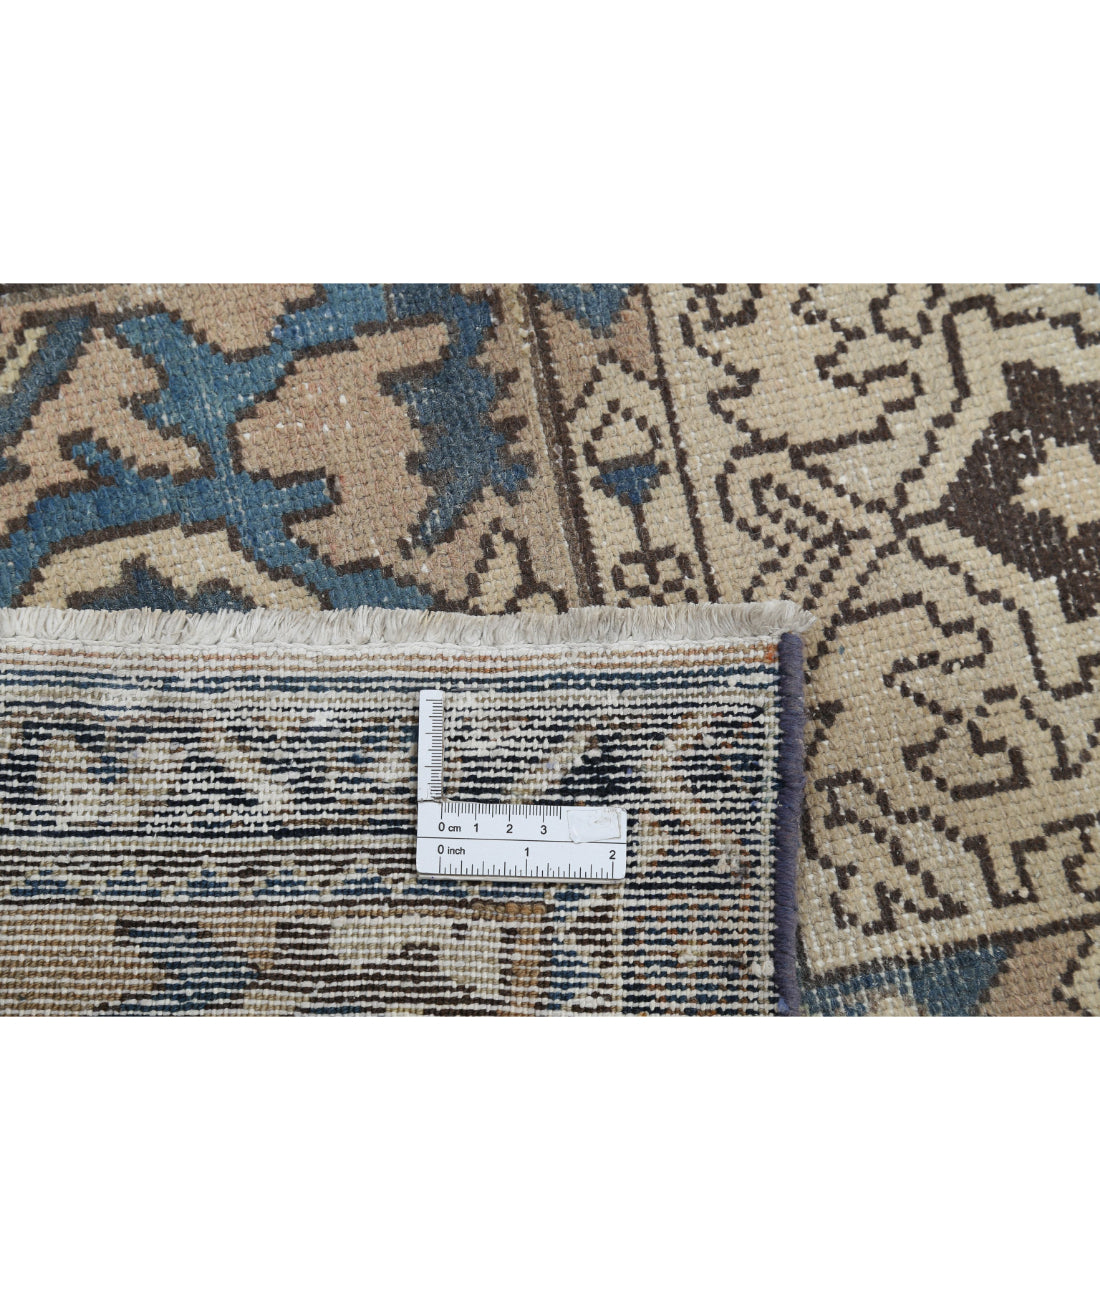 Hand Knotted Vintage Persian Bakhtiari Wool Rug - 9'7'' x 12'2'' 9'7'' x 12'2'' (288 X 365) / Blue / Taupe